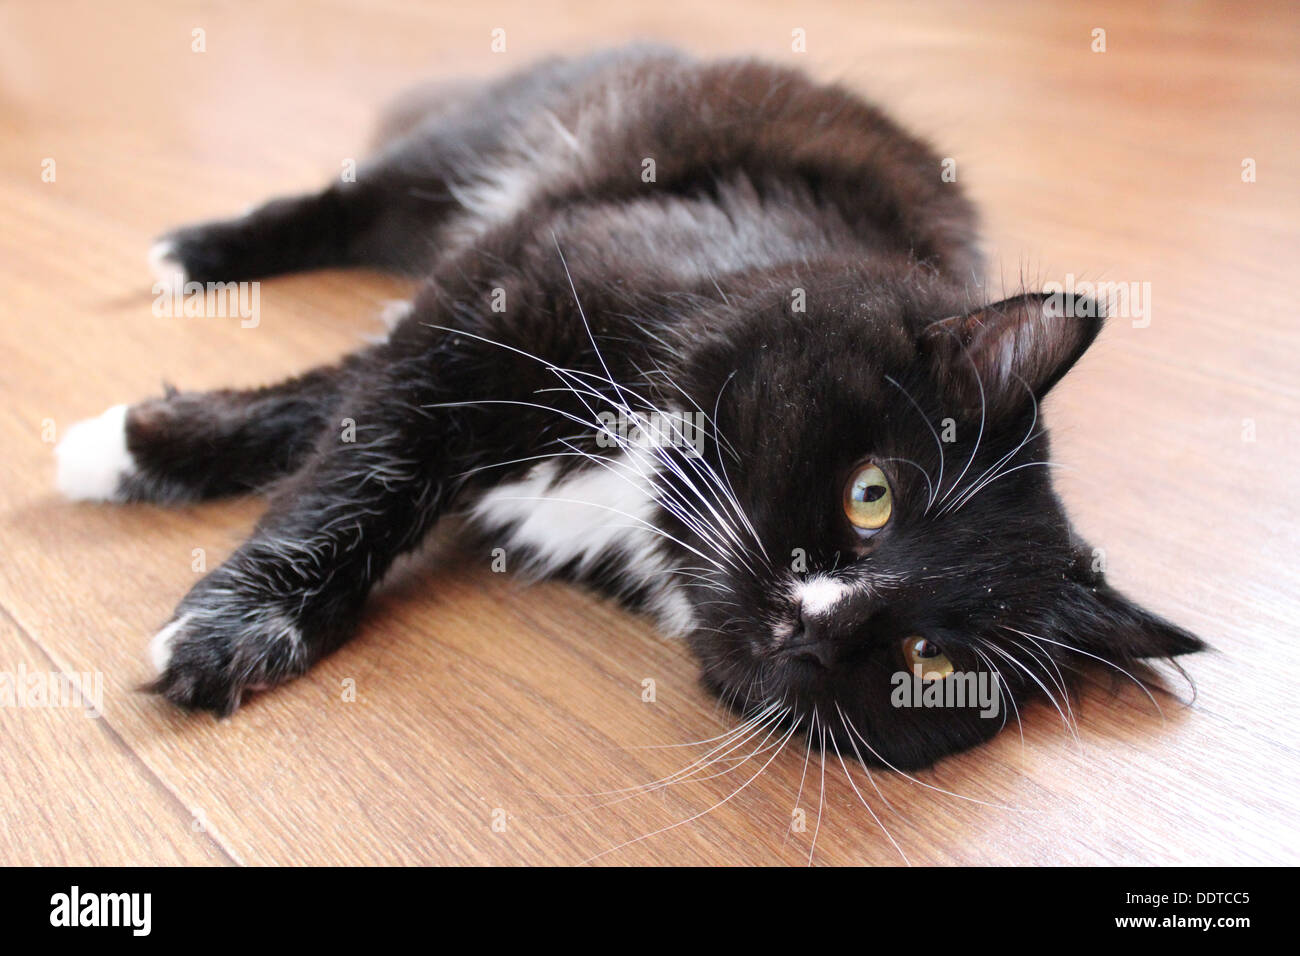 cat curious and black lying on the floor Stock Photo